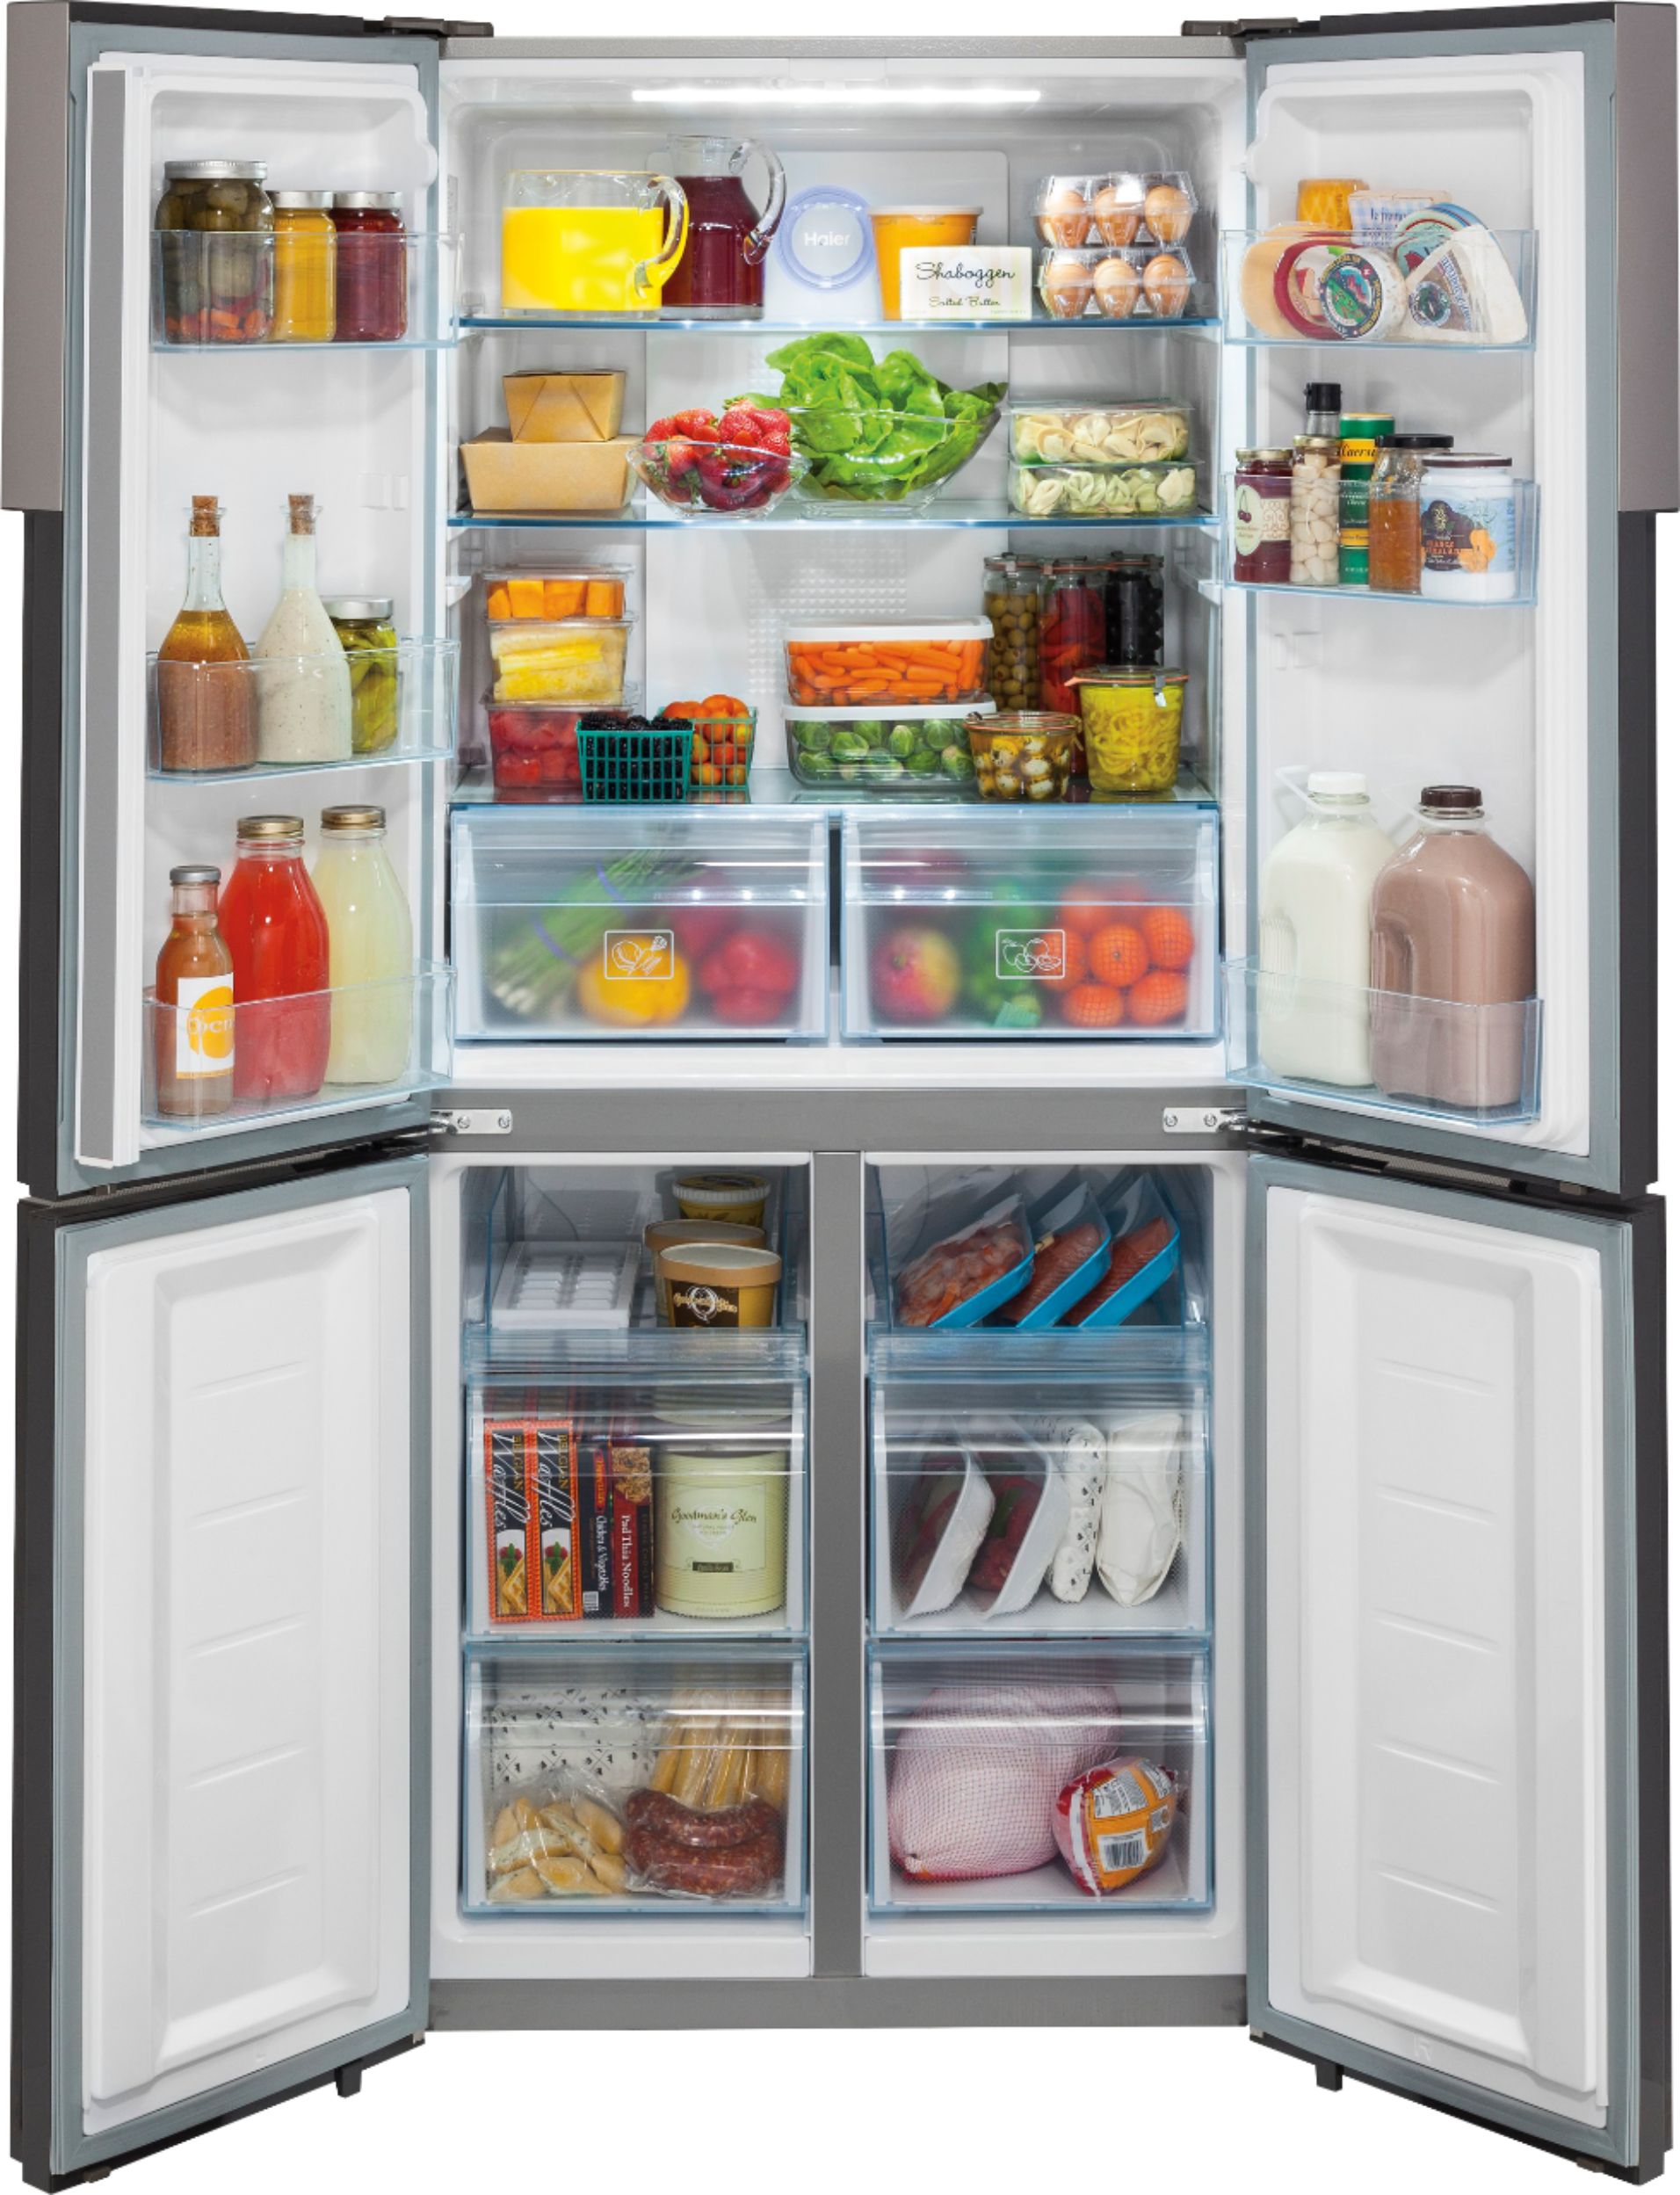 Haier 16.4 Cu. Ft. Counter-Depth Side-by-Side Refrigerator Stainless ...